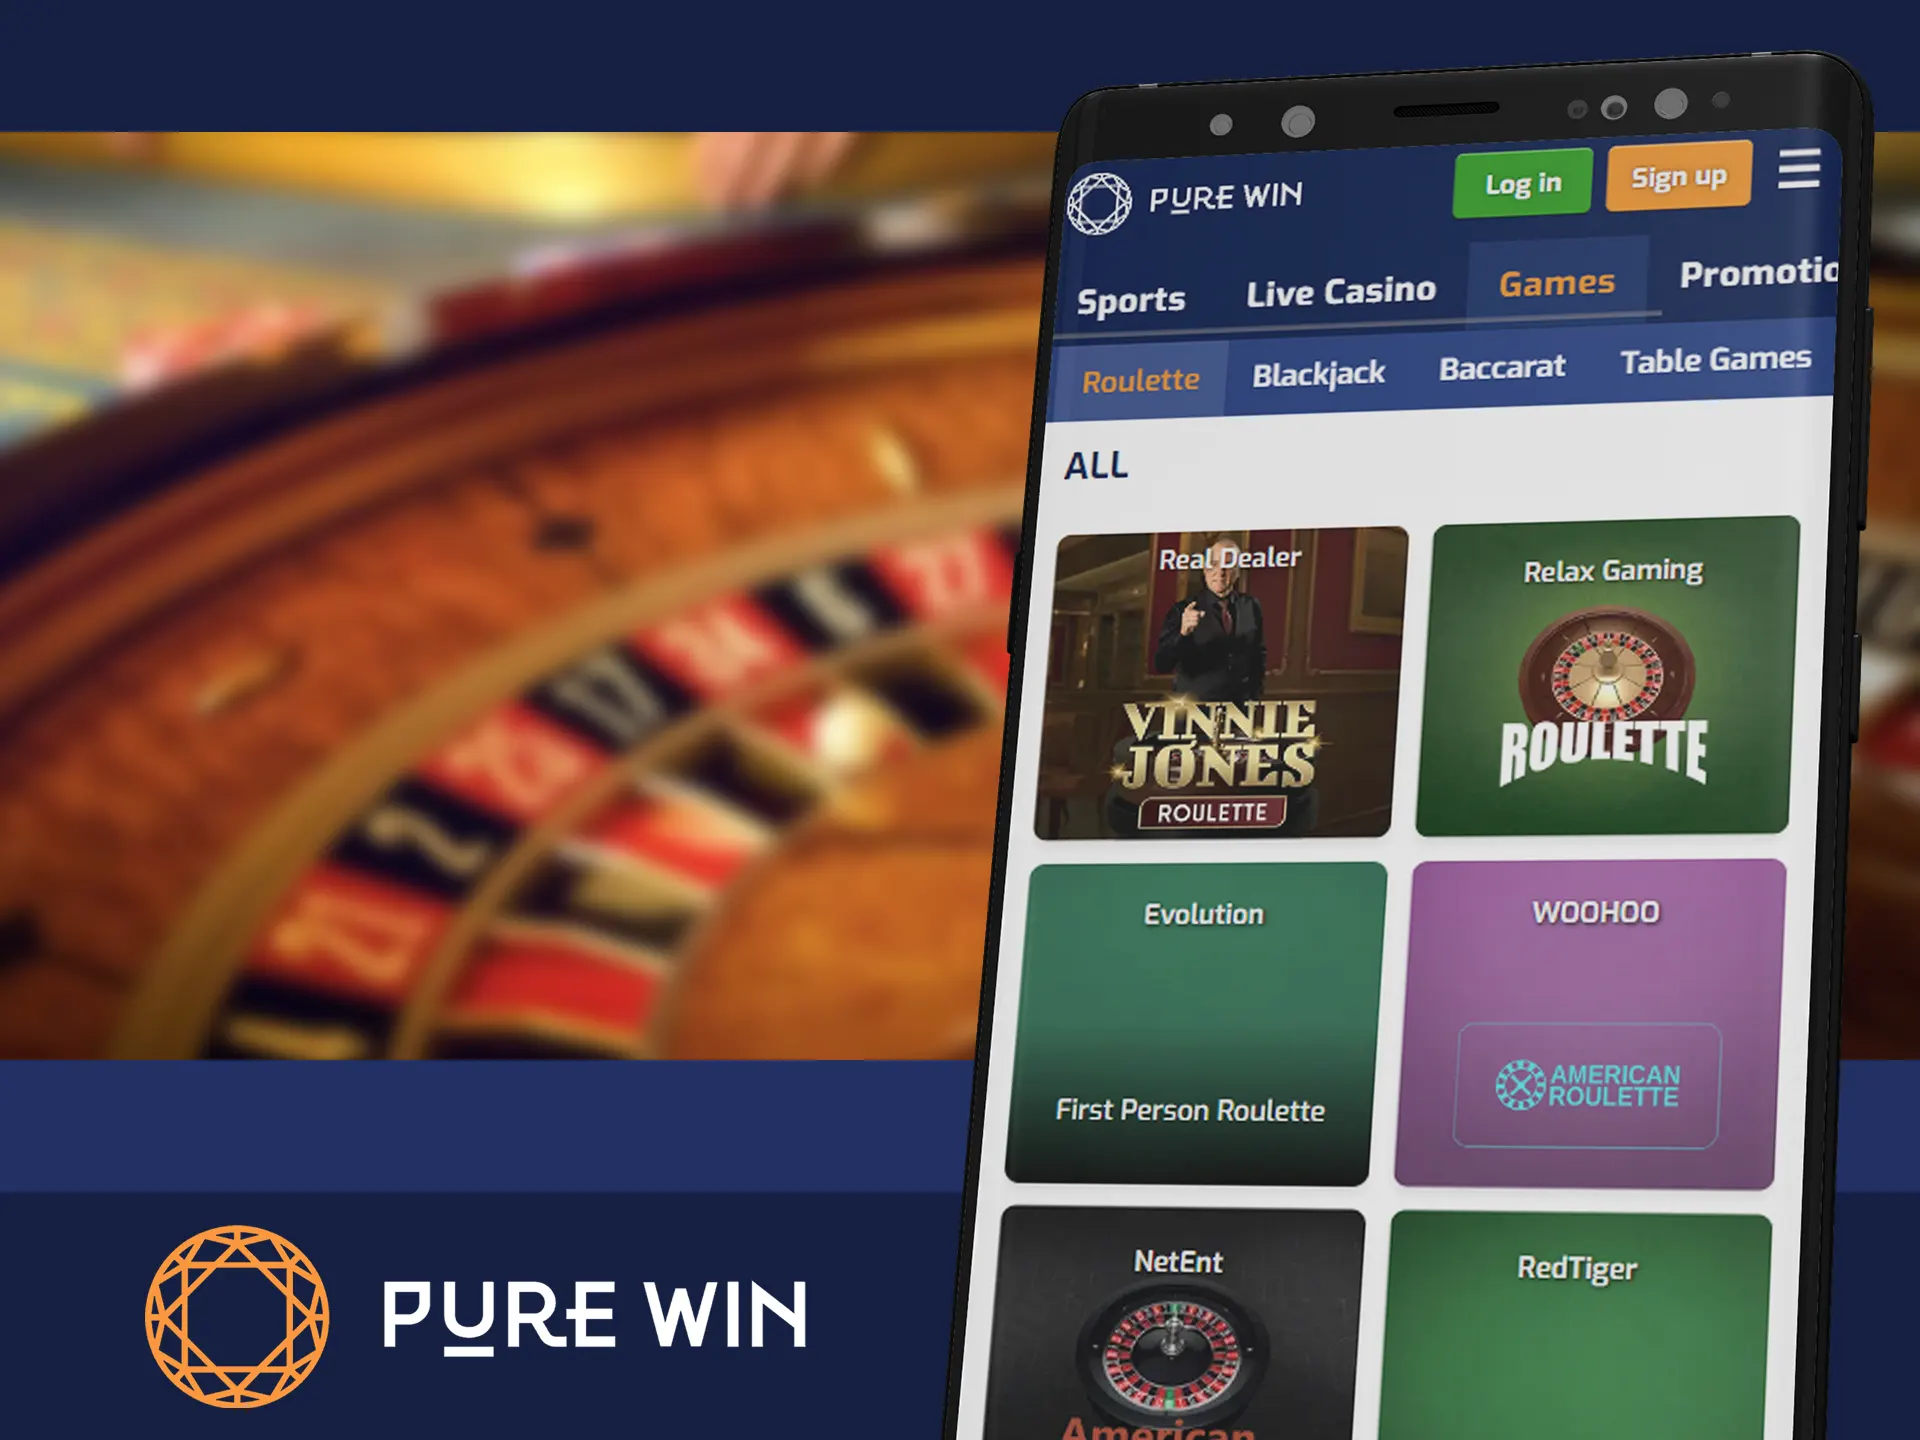 Spin Pure Win roulette an win big prizes.